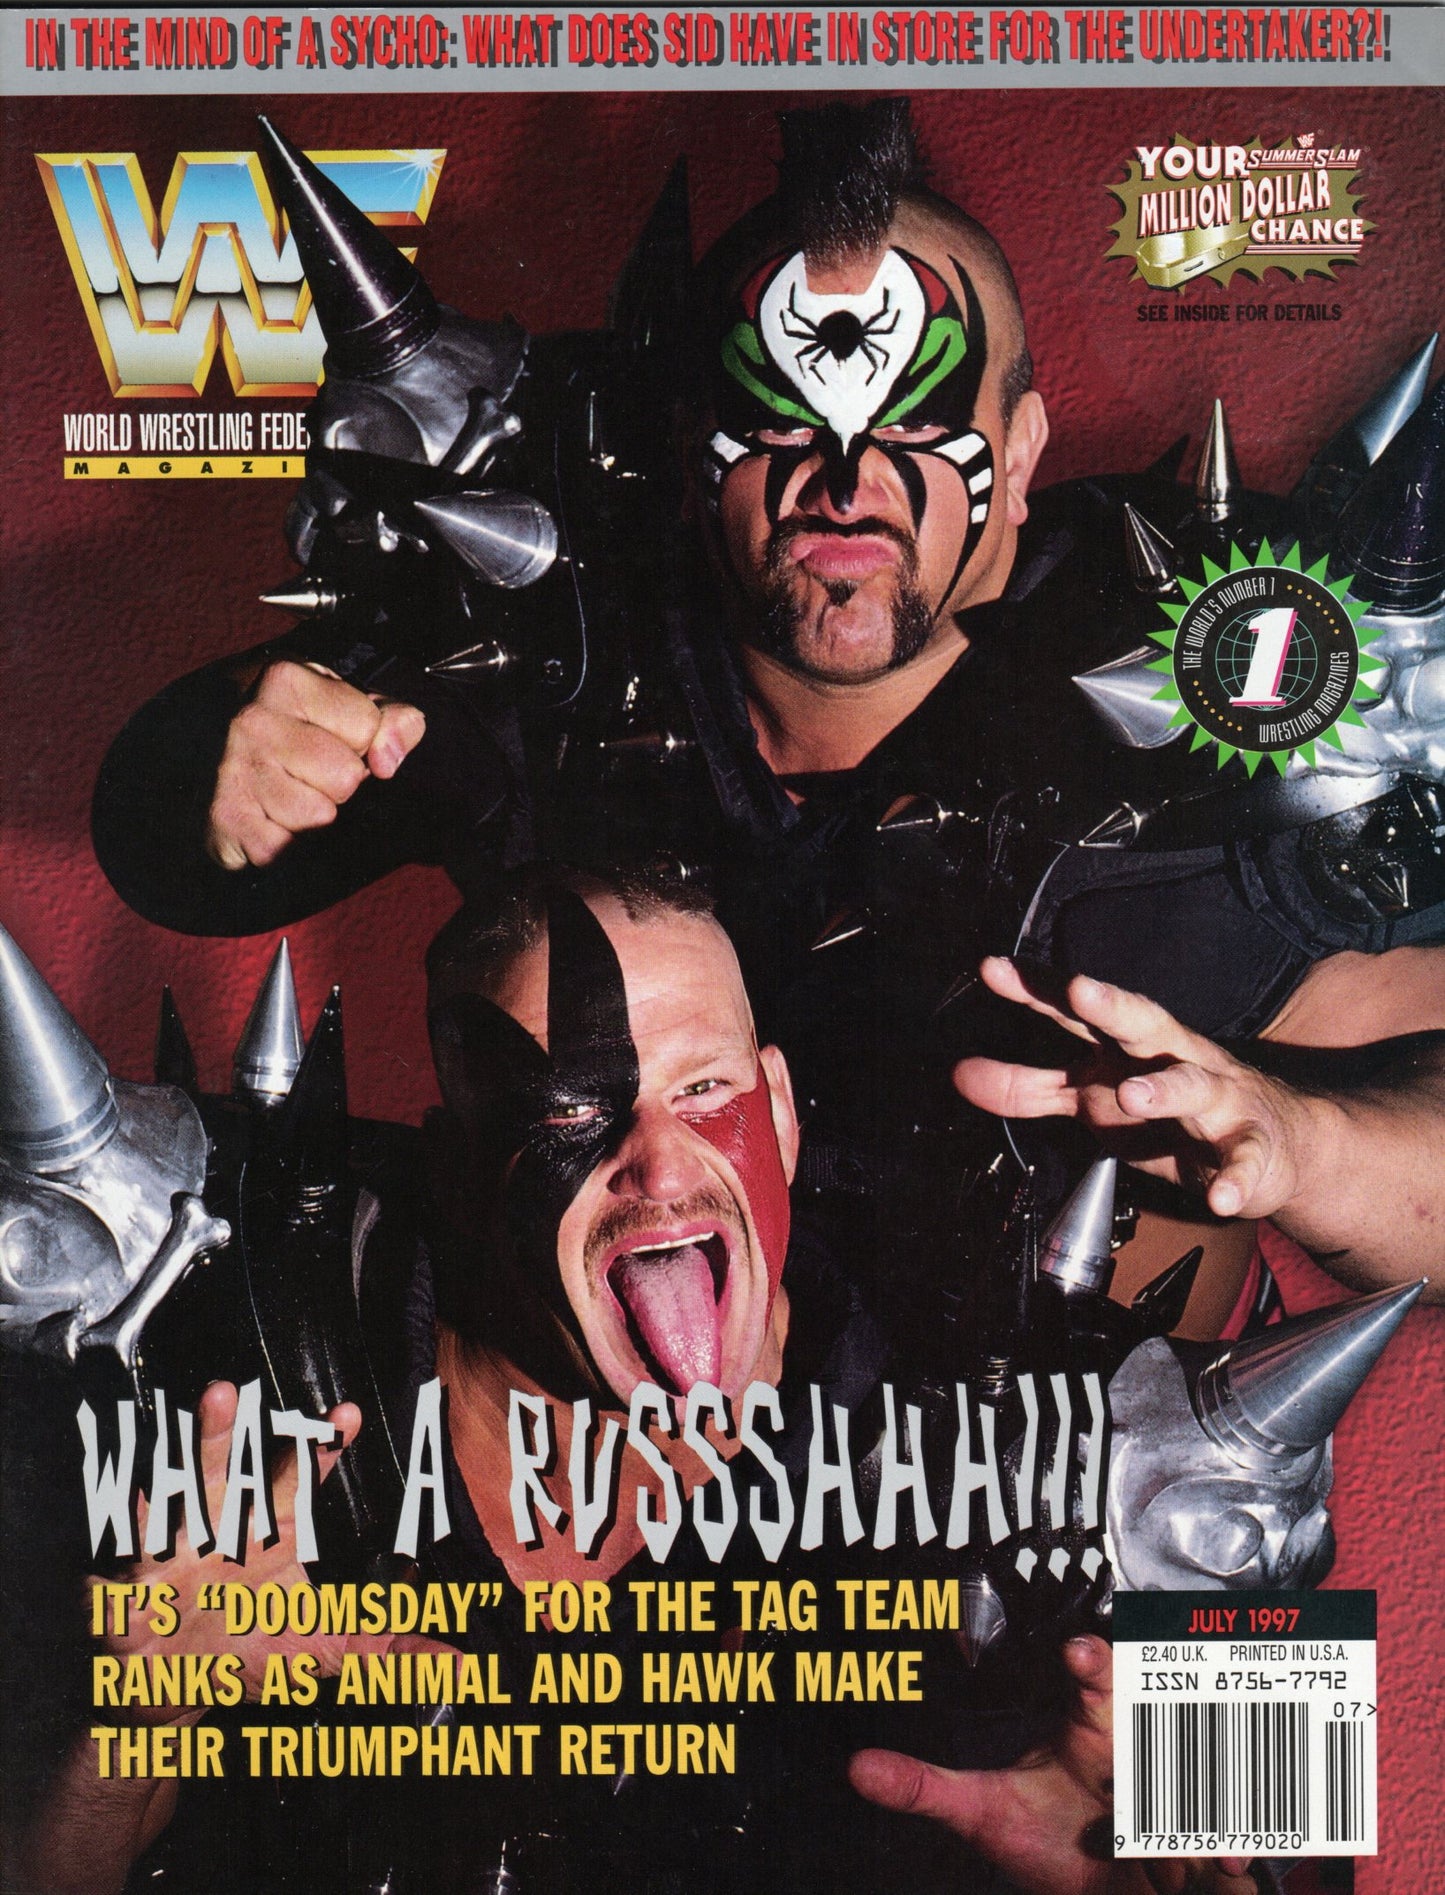 WWF Magazine July 1997 Includes Trading Cards